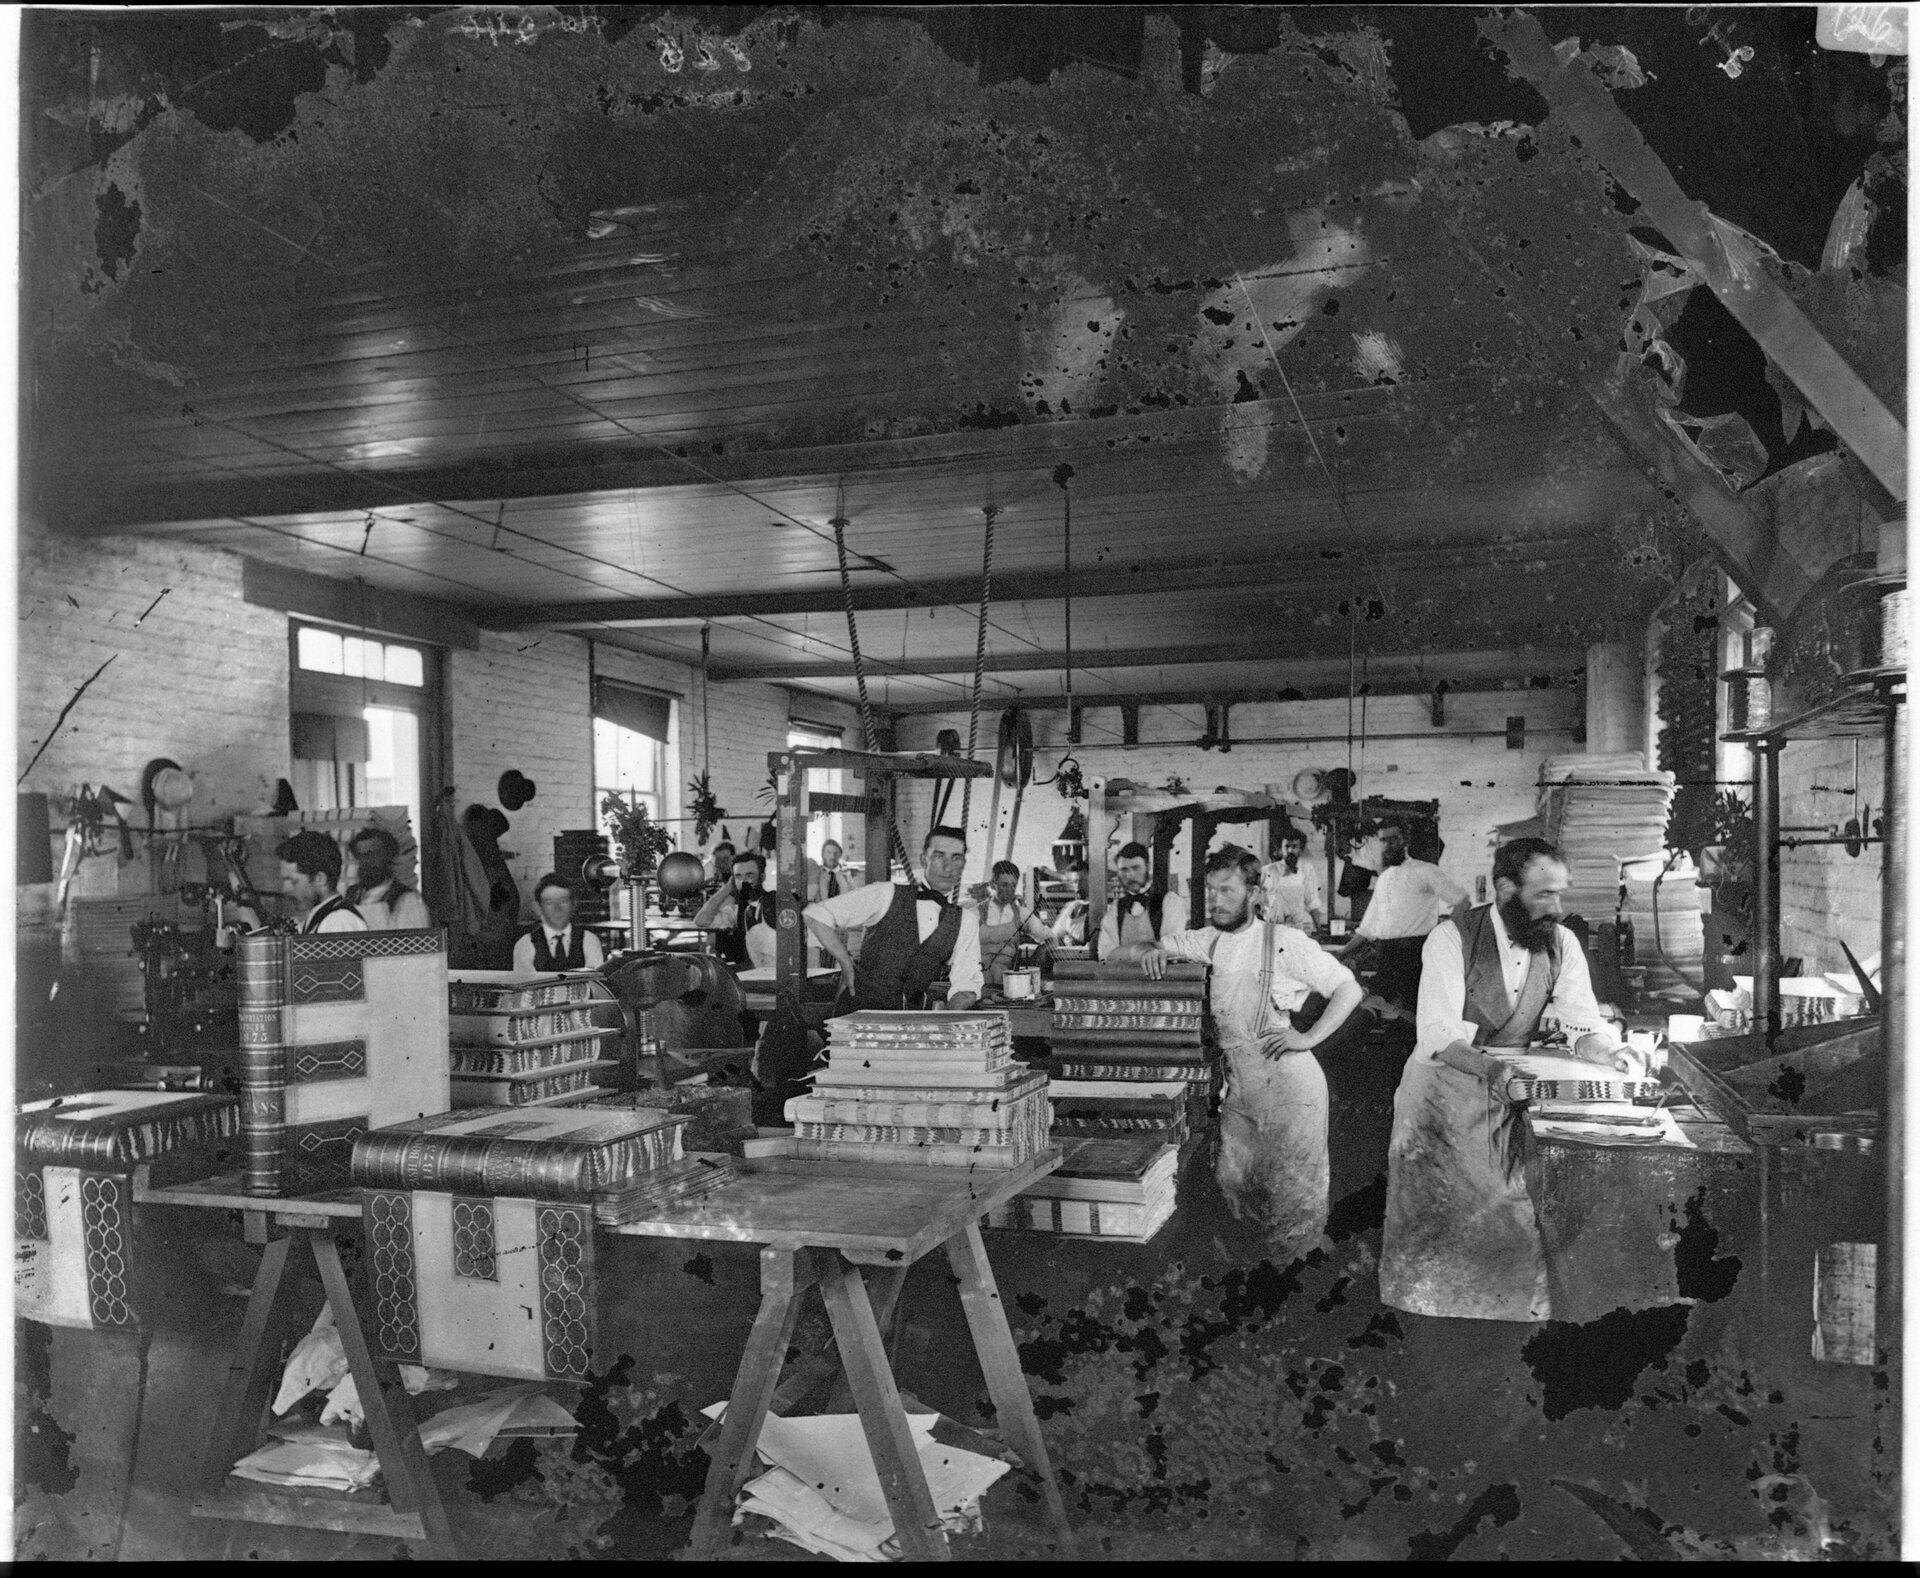 Men in work aprons stand in a workshop surrounded by tables stacked with large books